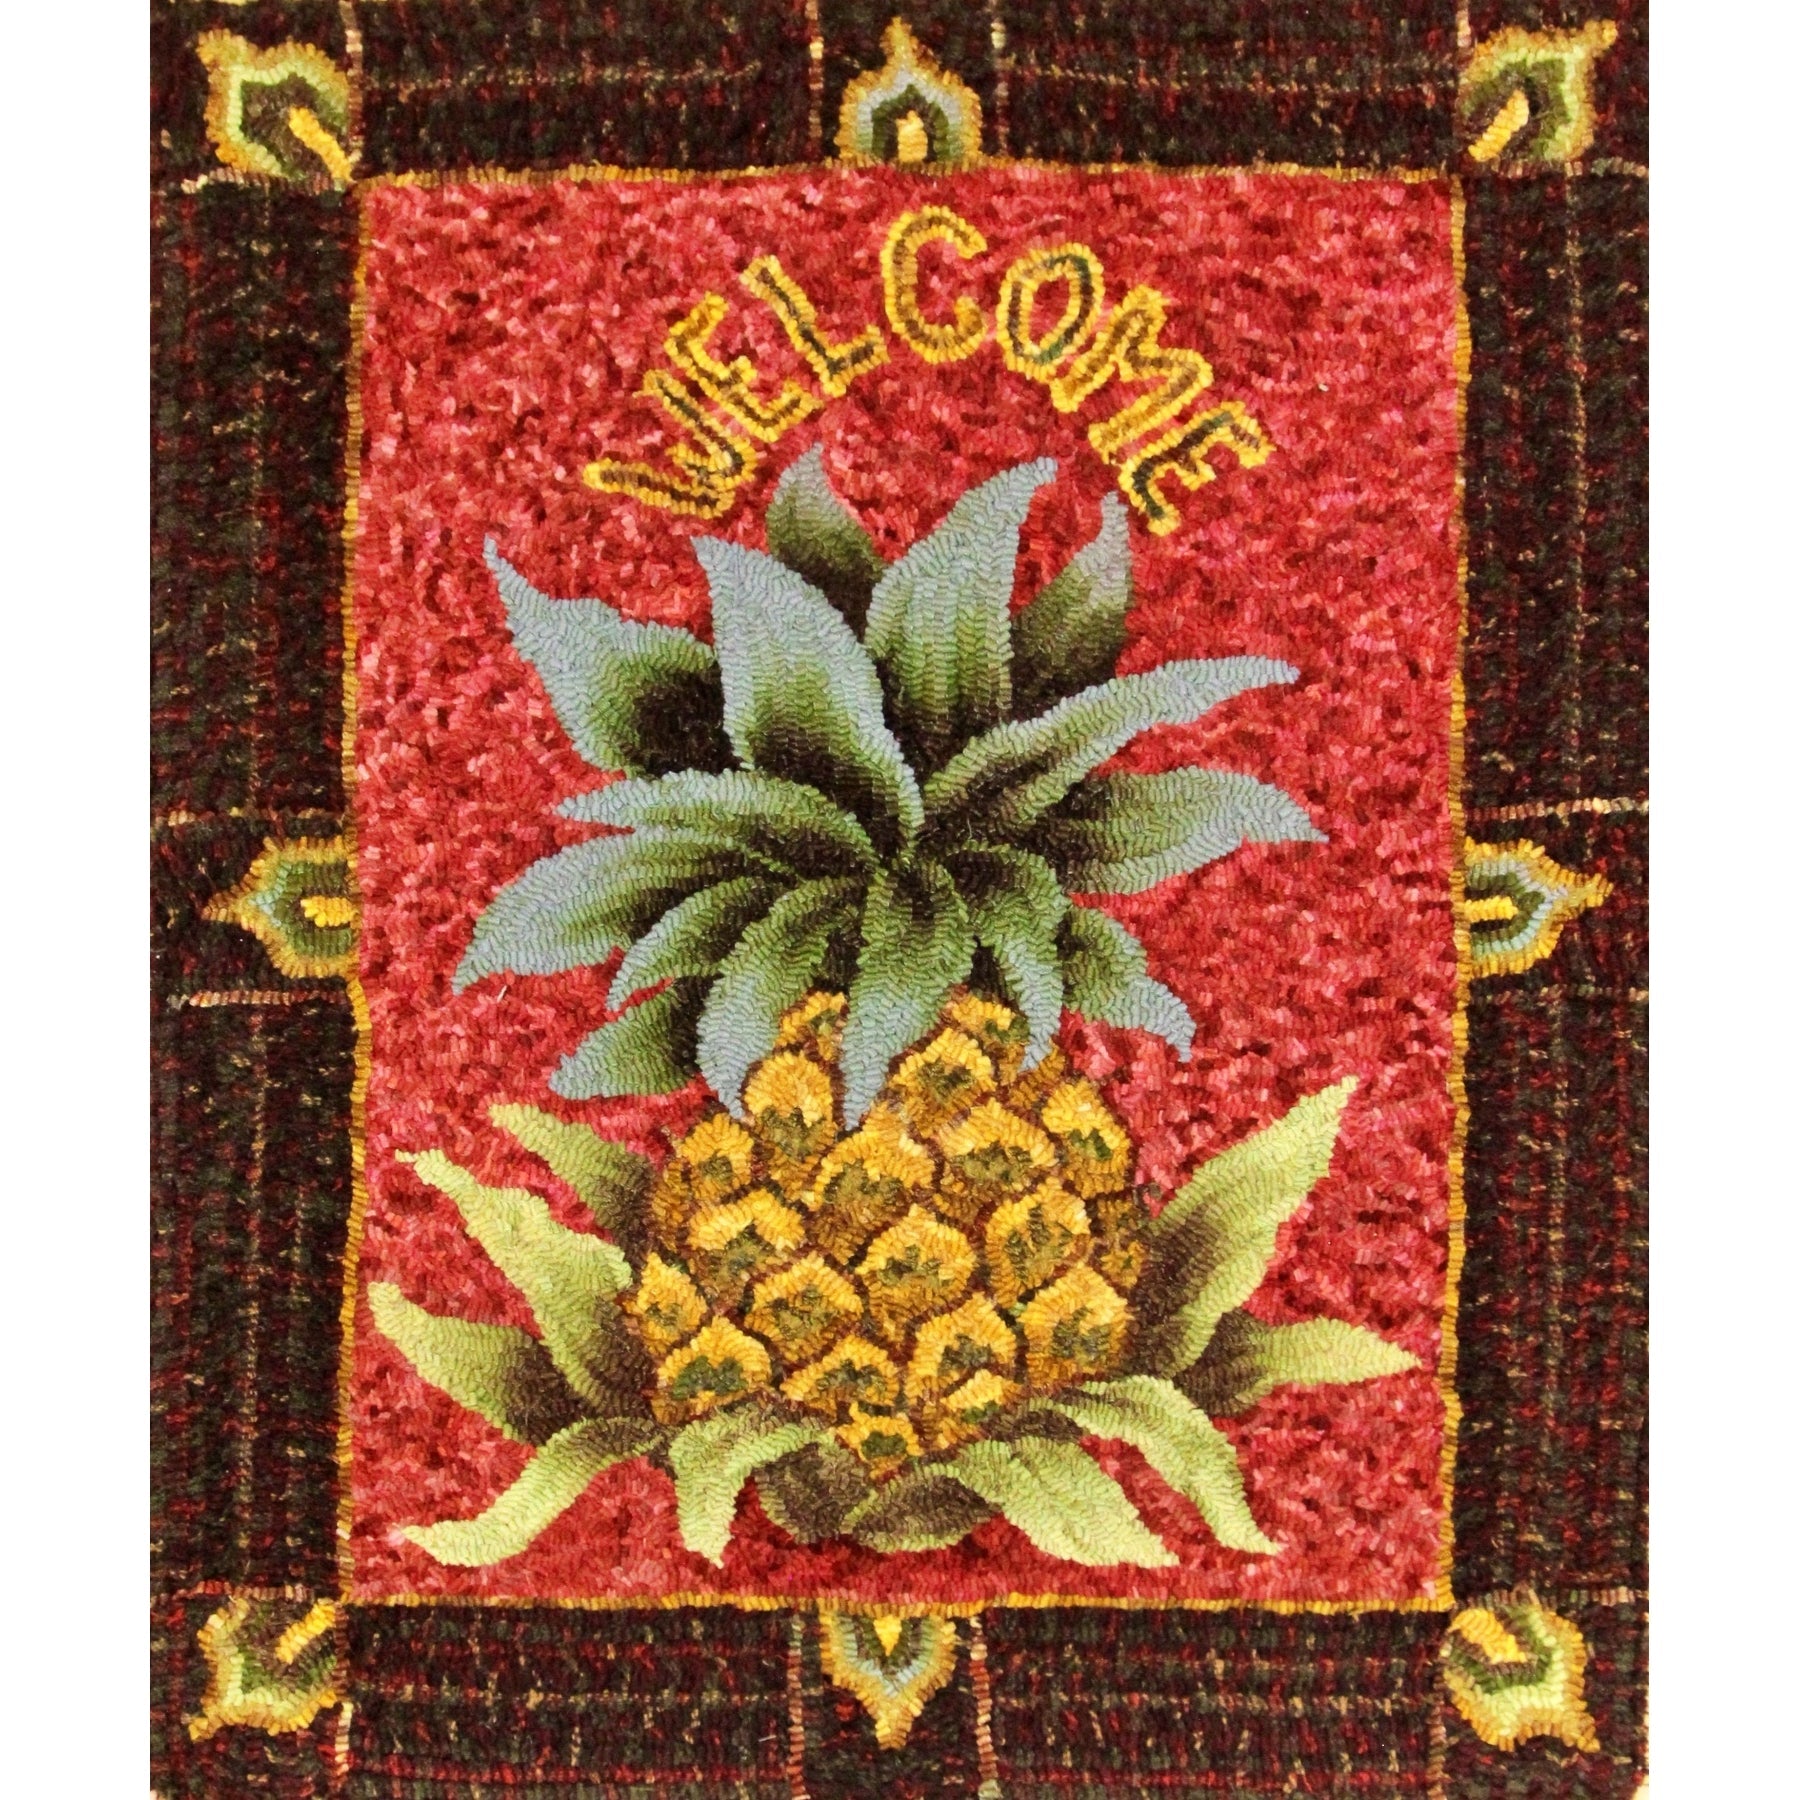 Welcome Pineapple - with Border, rug hooked by Stacey Van Dyne